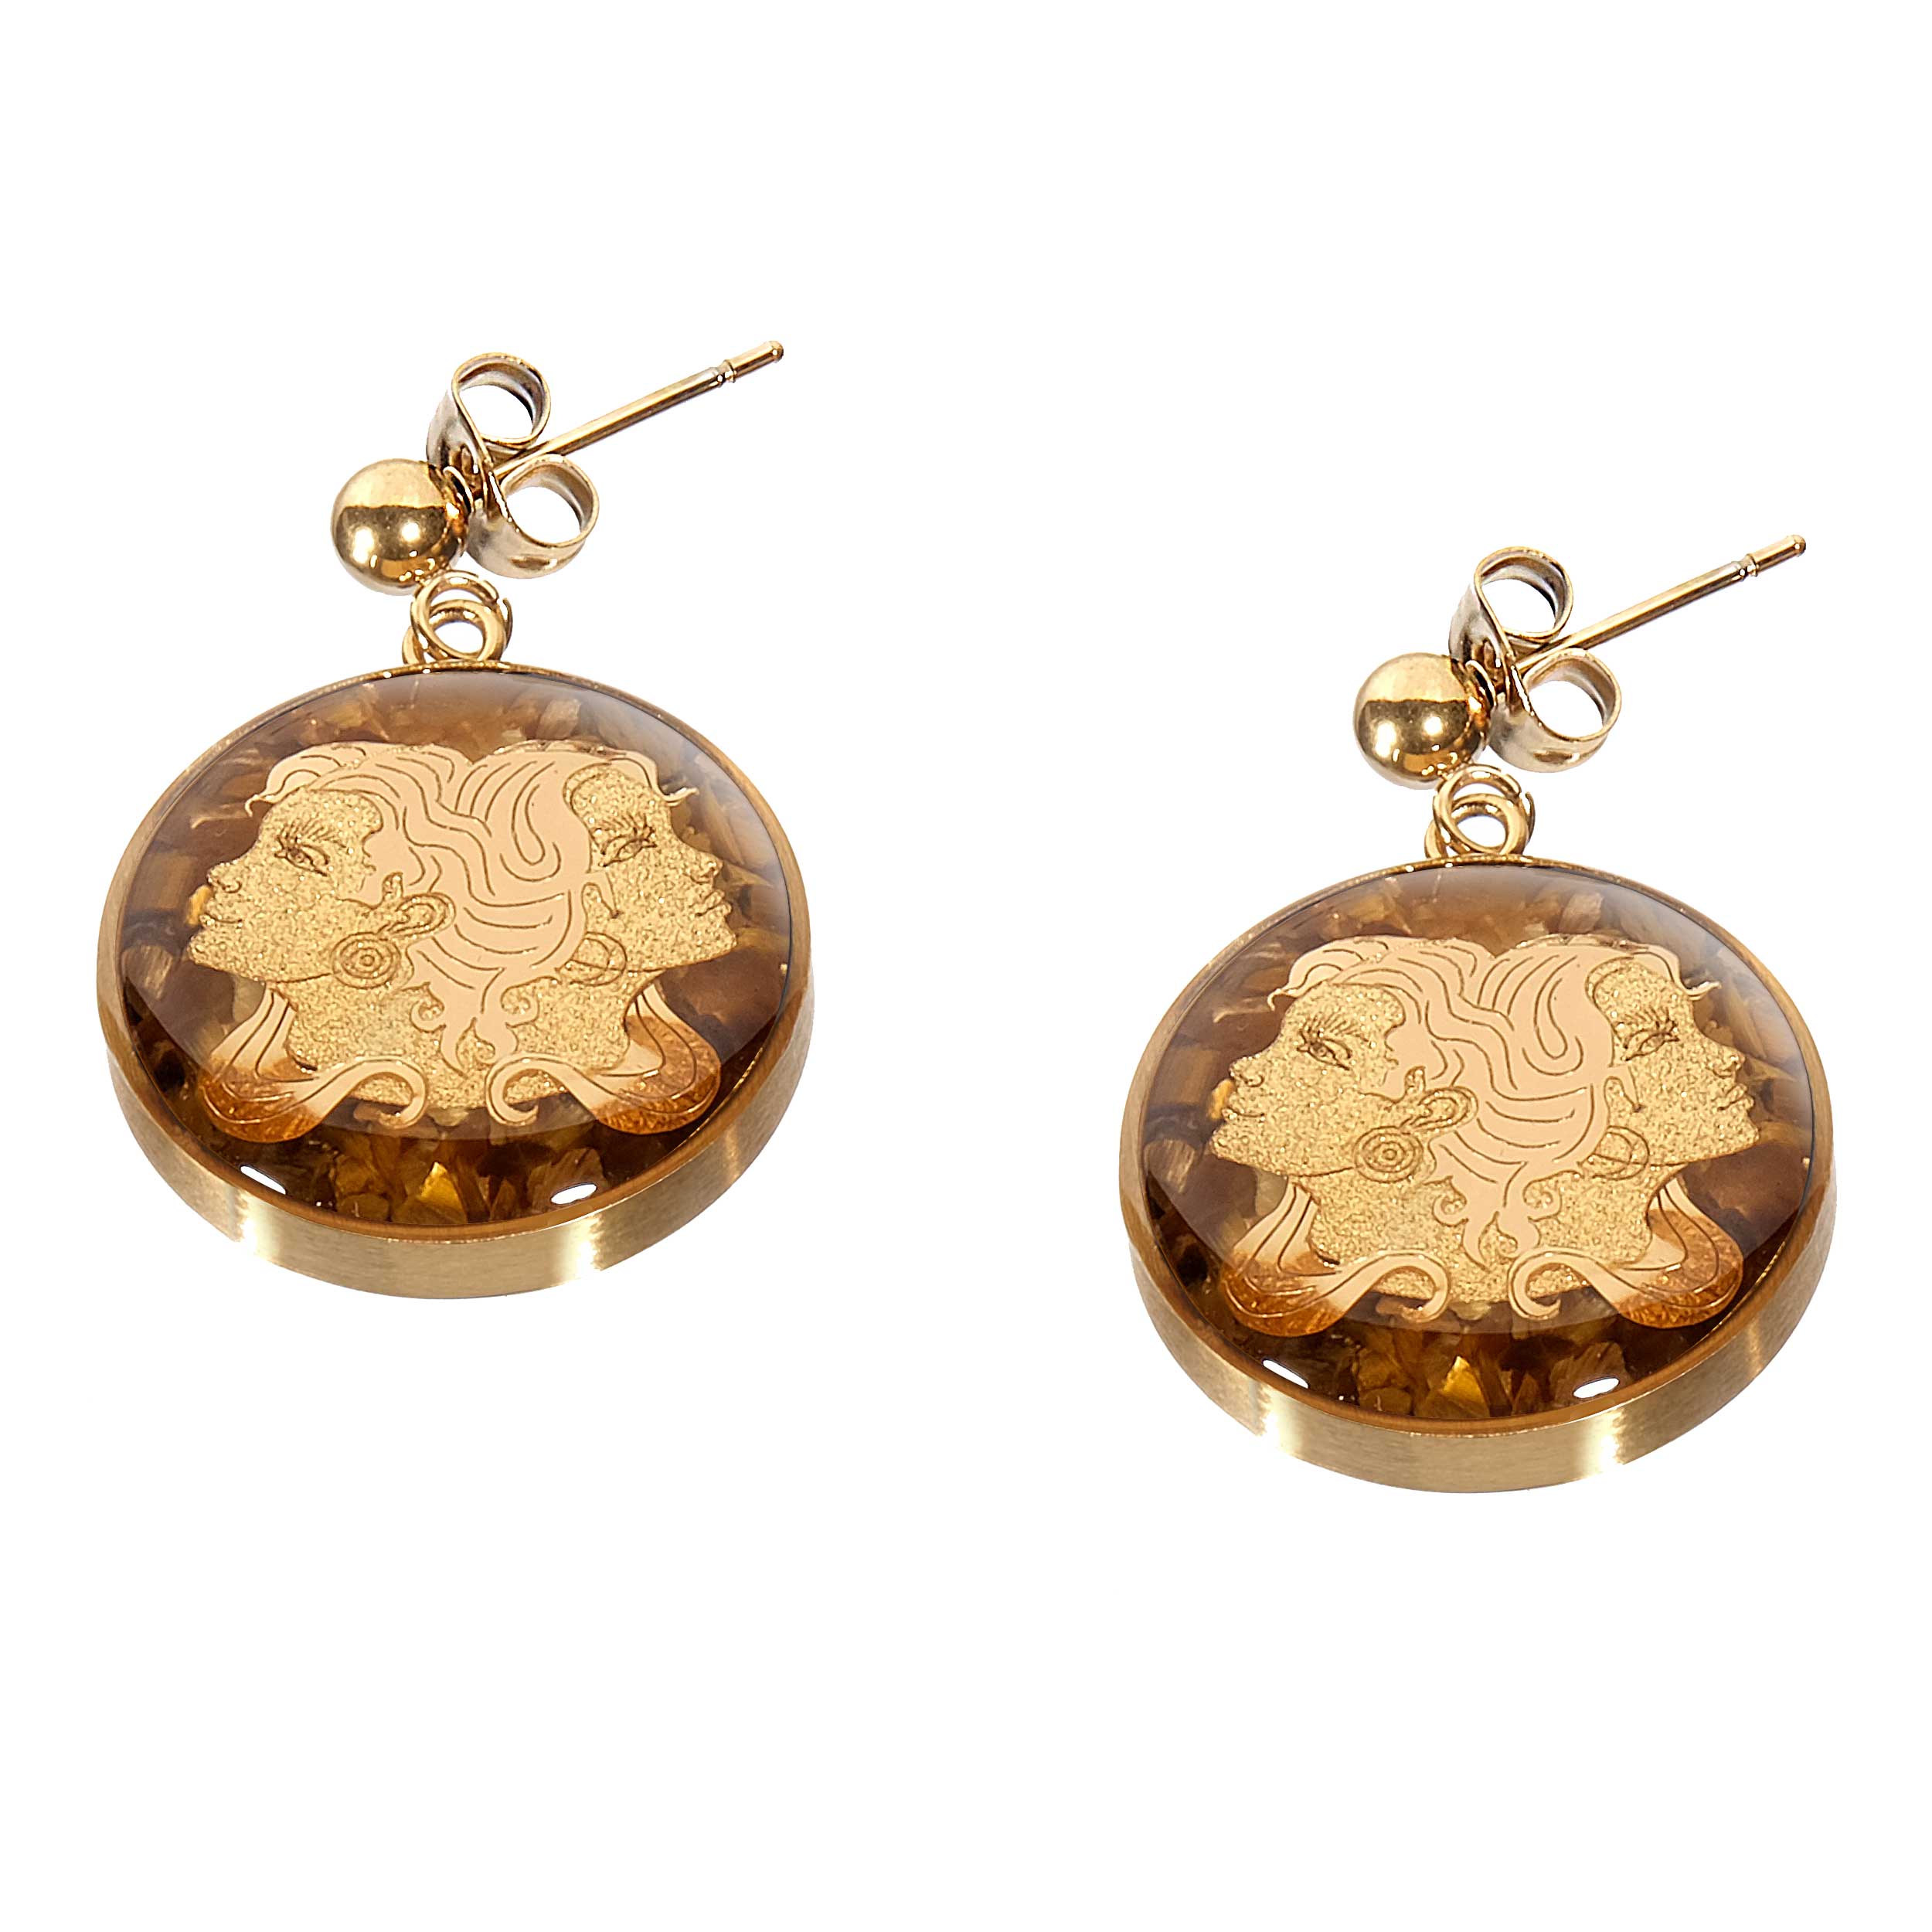 Brown tiger stone earrings and 24 carat gold leaf with the symbol design of June